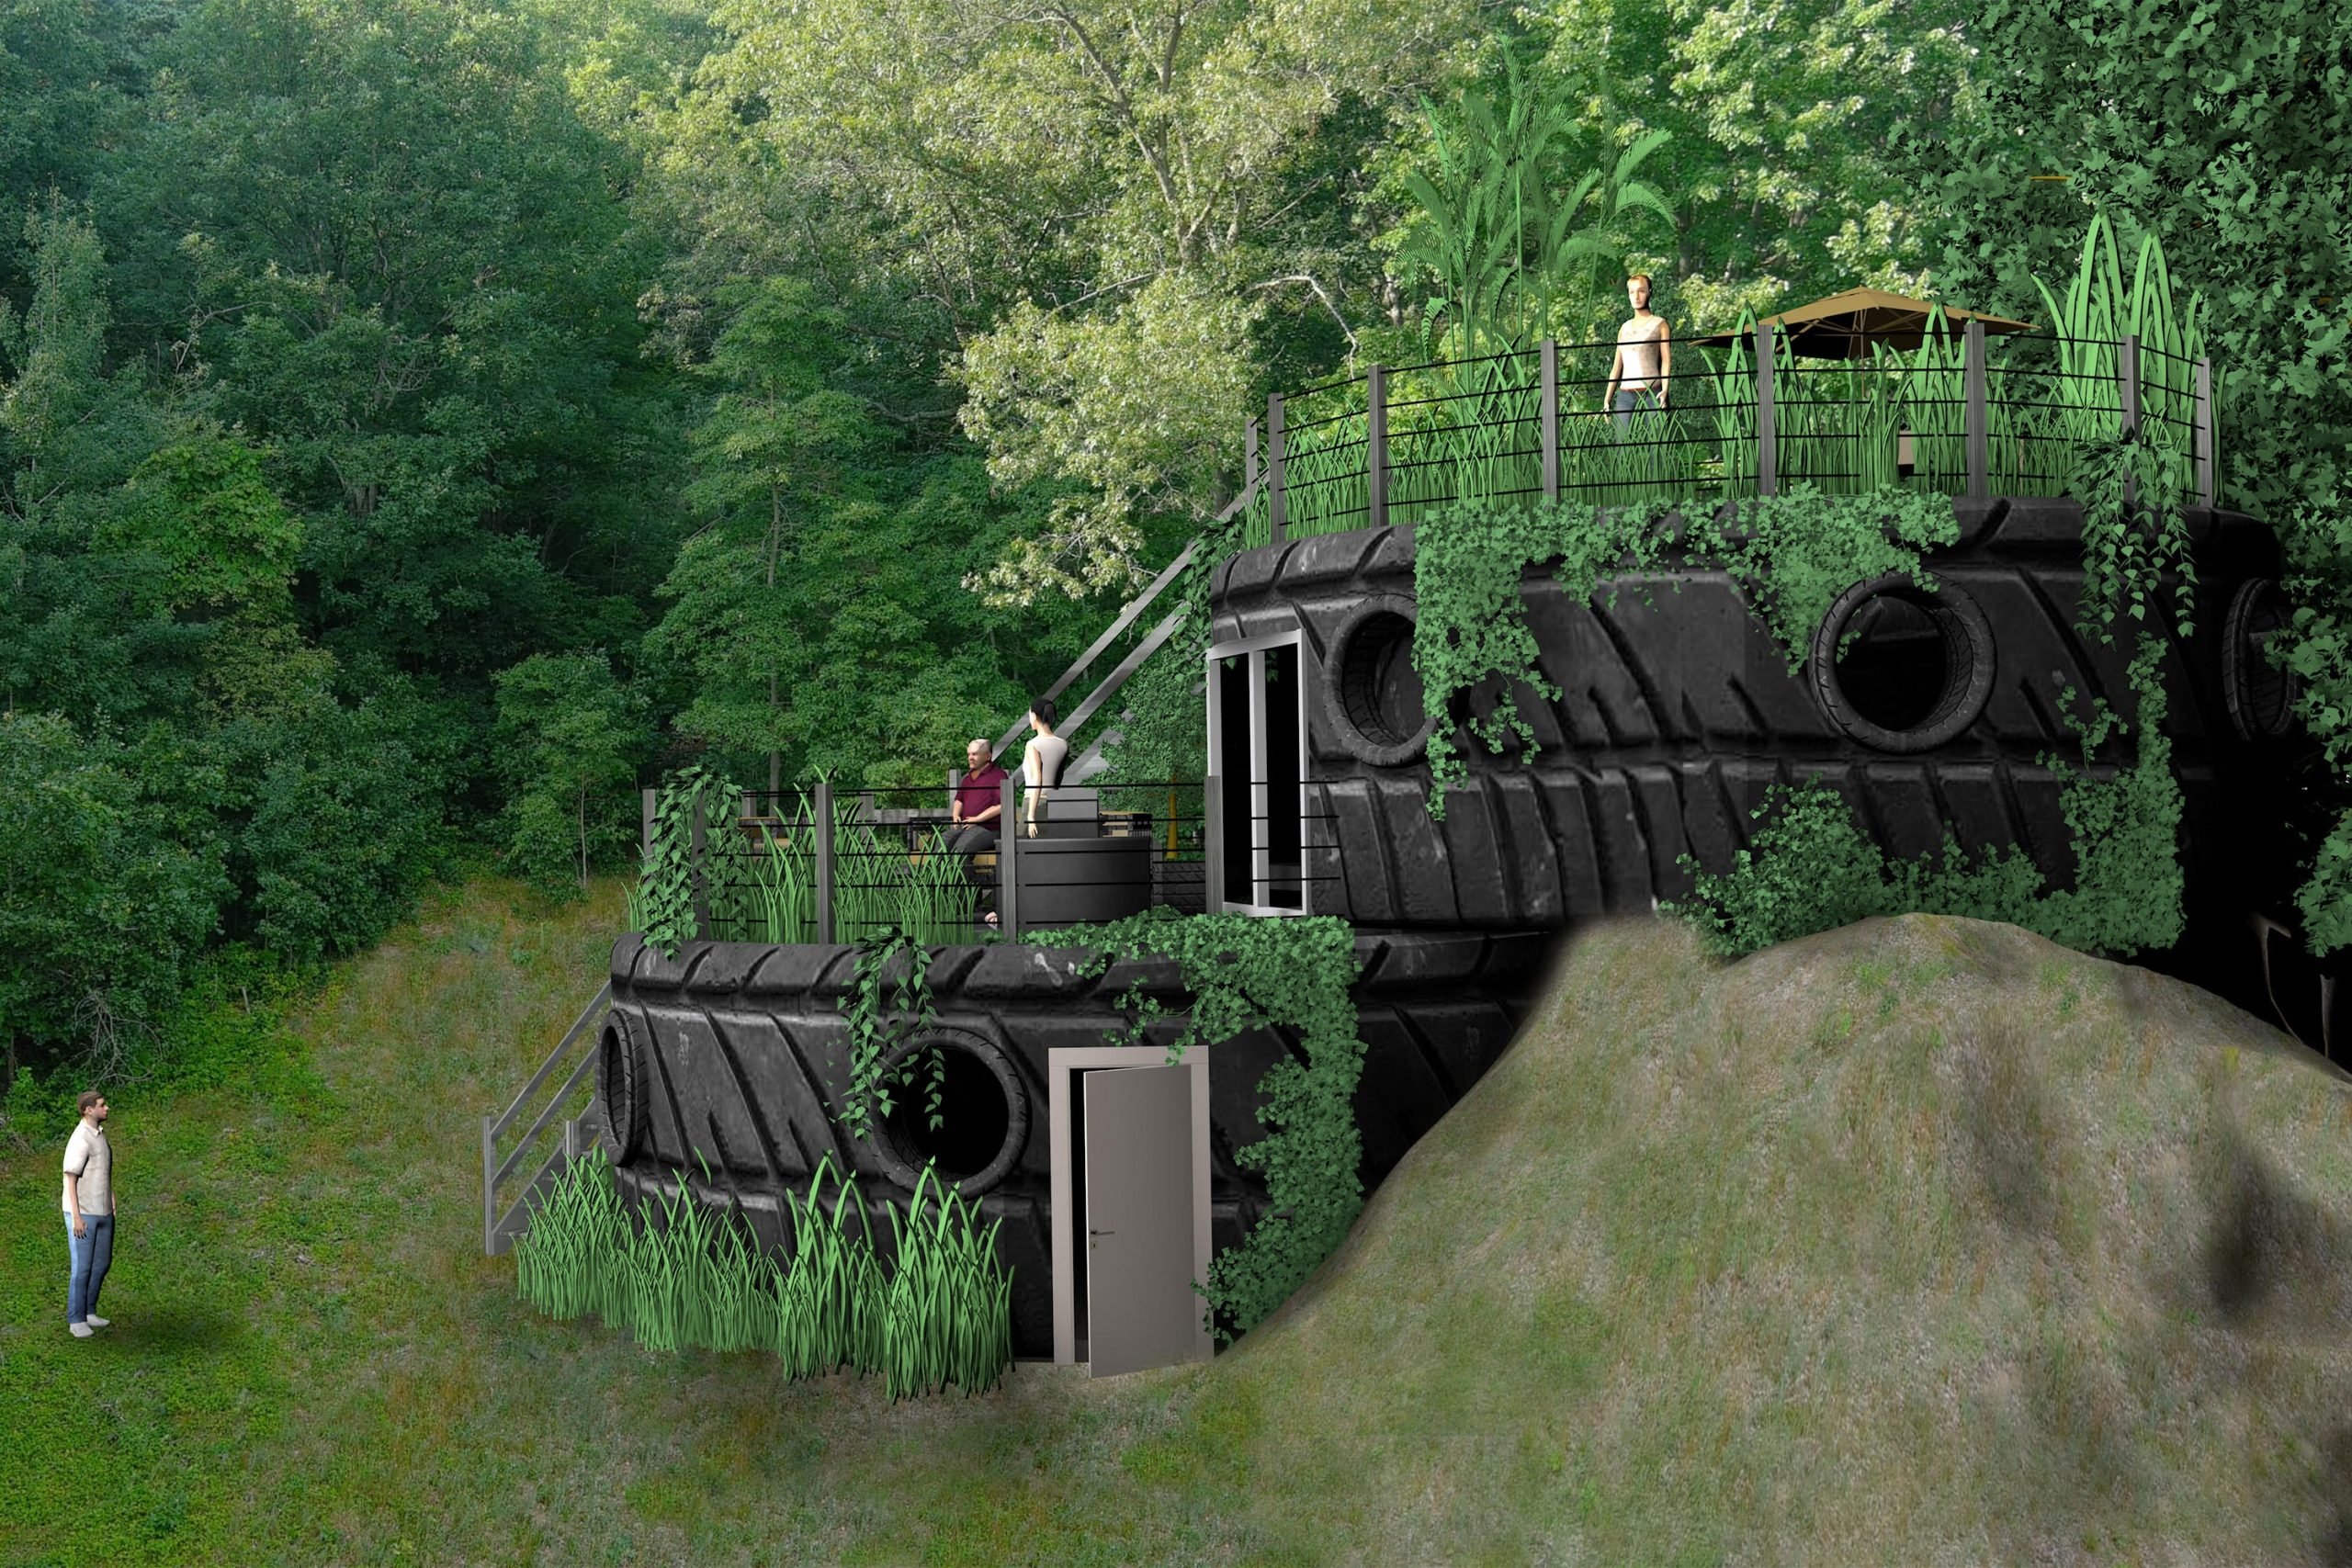 Tire-Shaped House Made of Junkyard Tires by Kim S. for Airbnb OMG! Fund